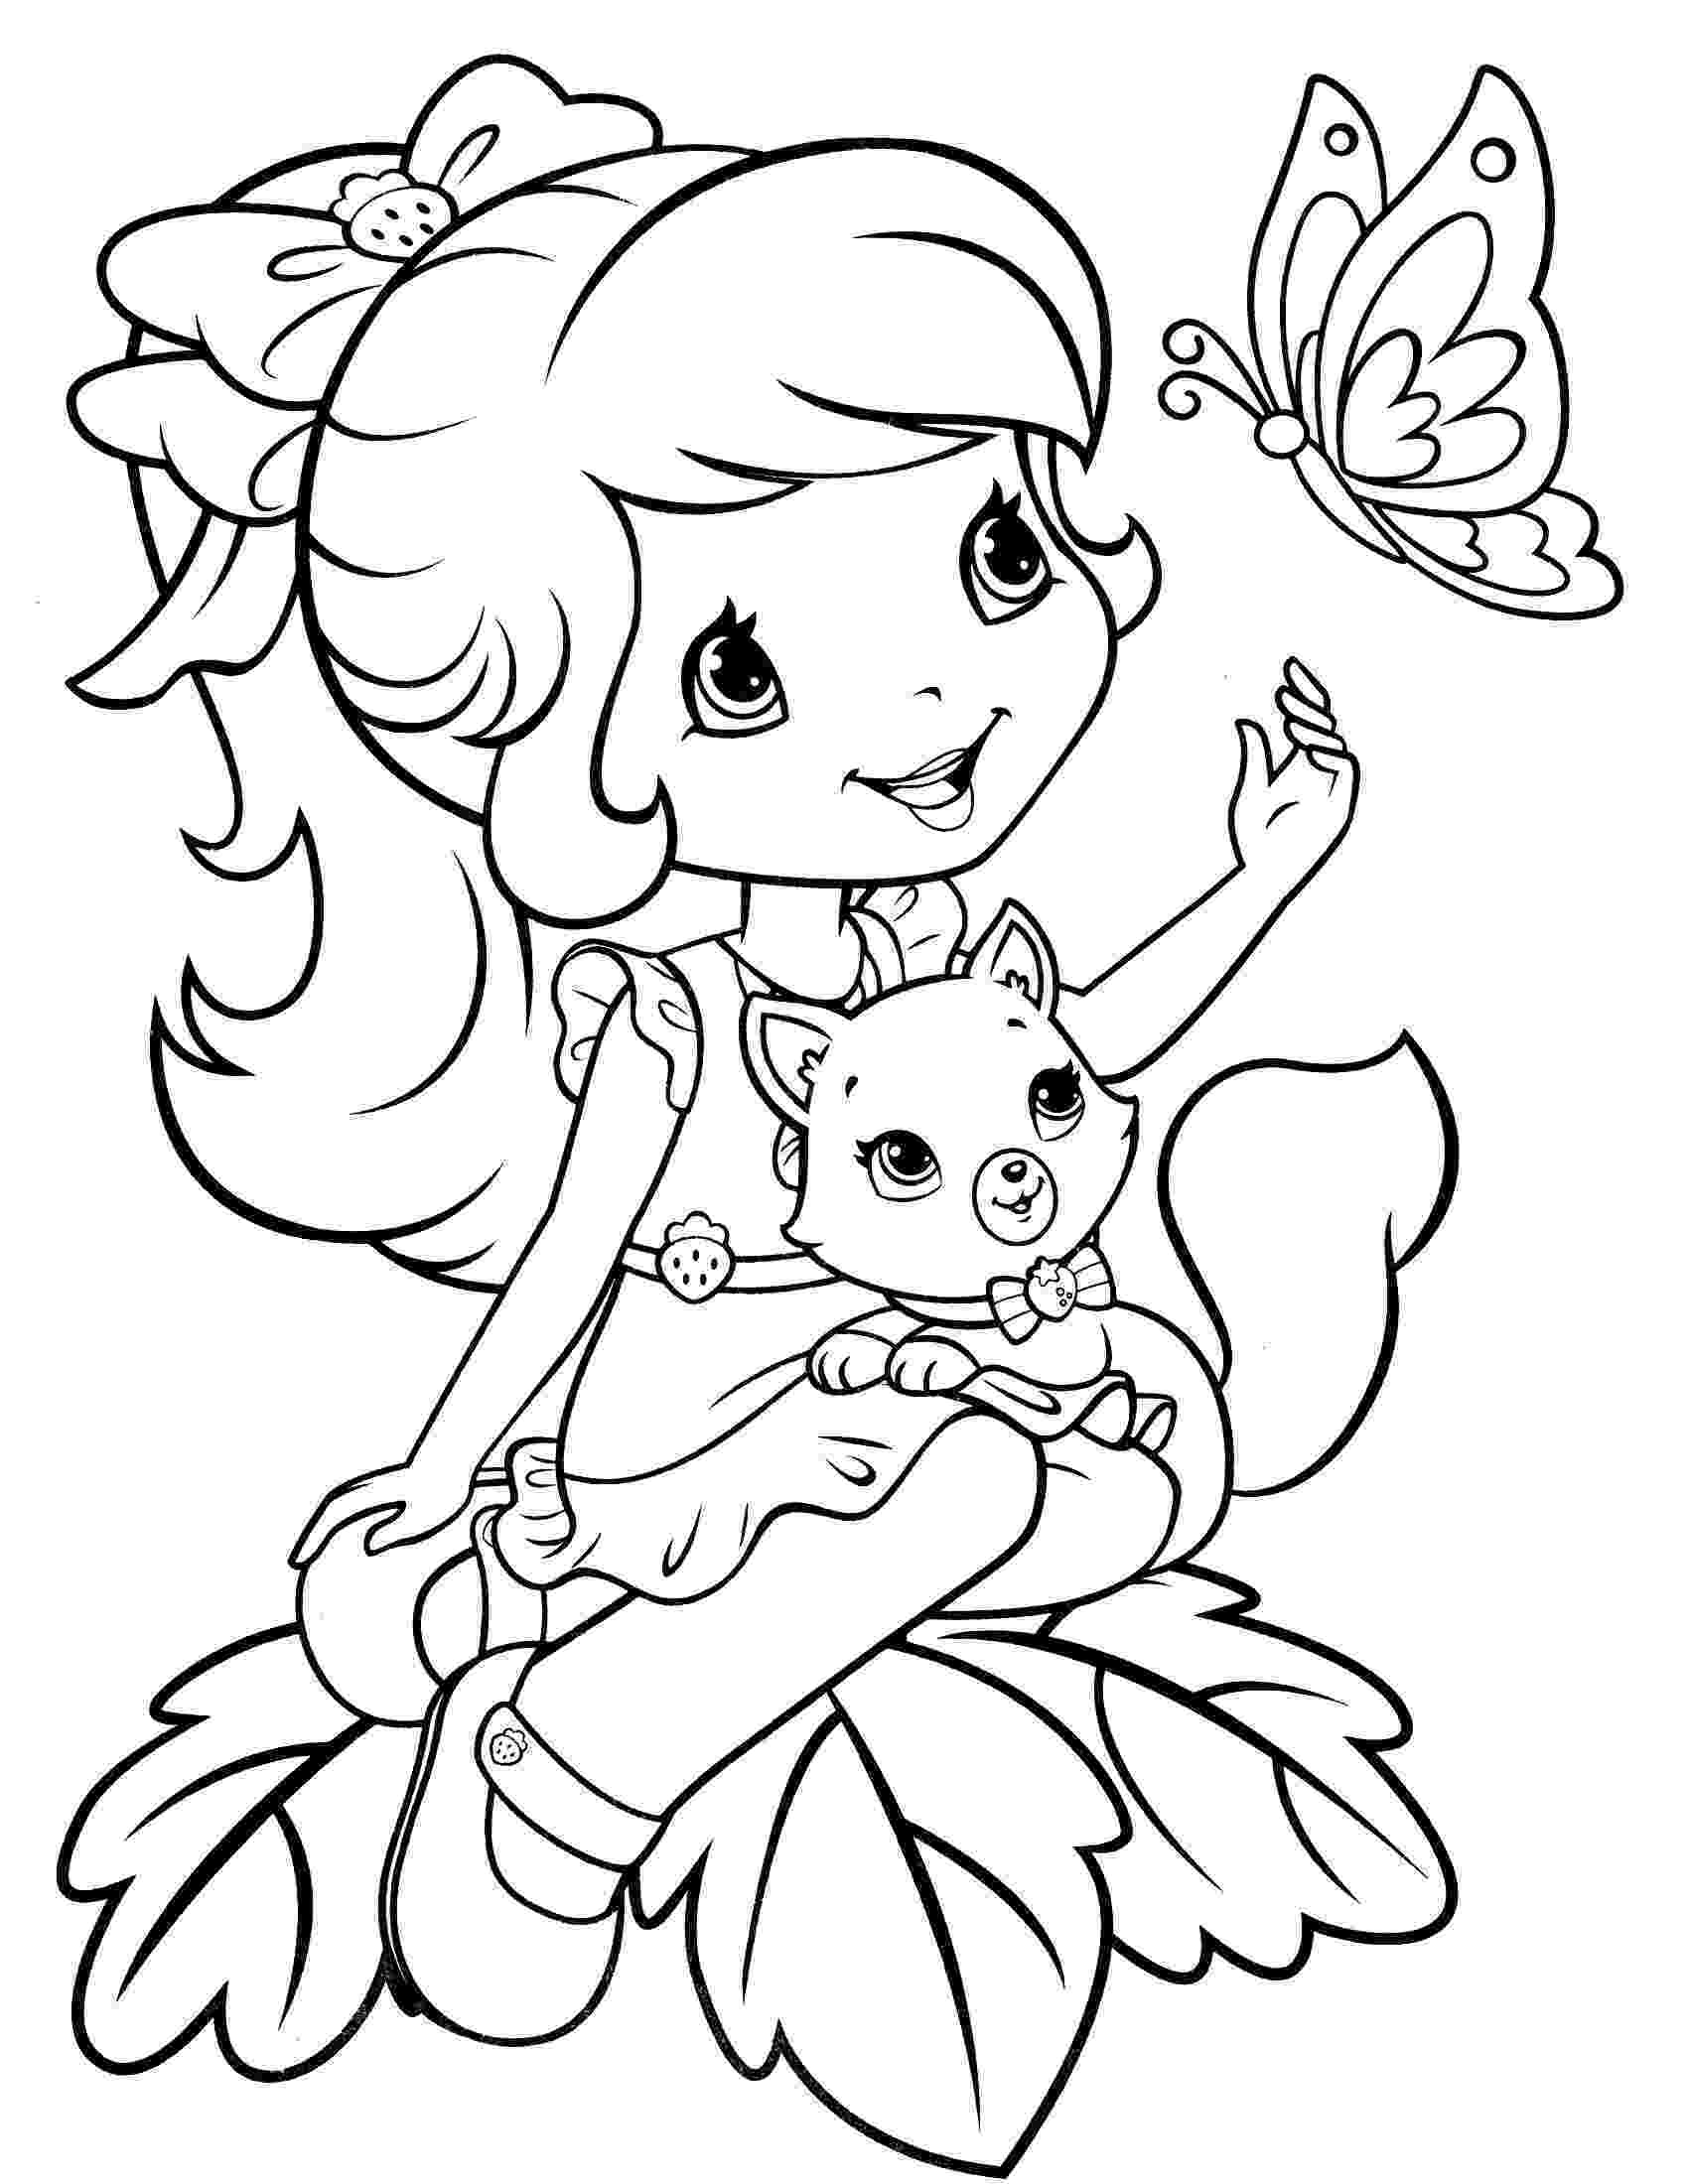 pictures of strawberry shortcake strawberry shortcake coloring page Детски pinterest of strawberry pictures shortcake 